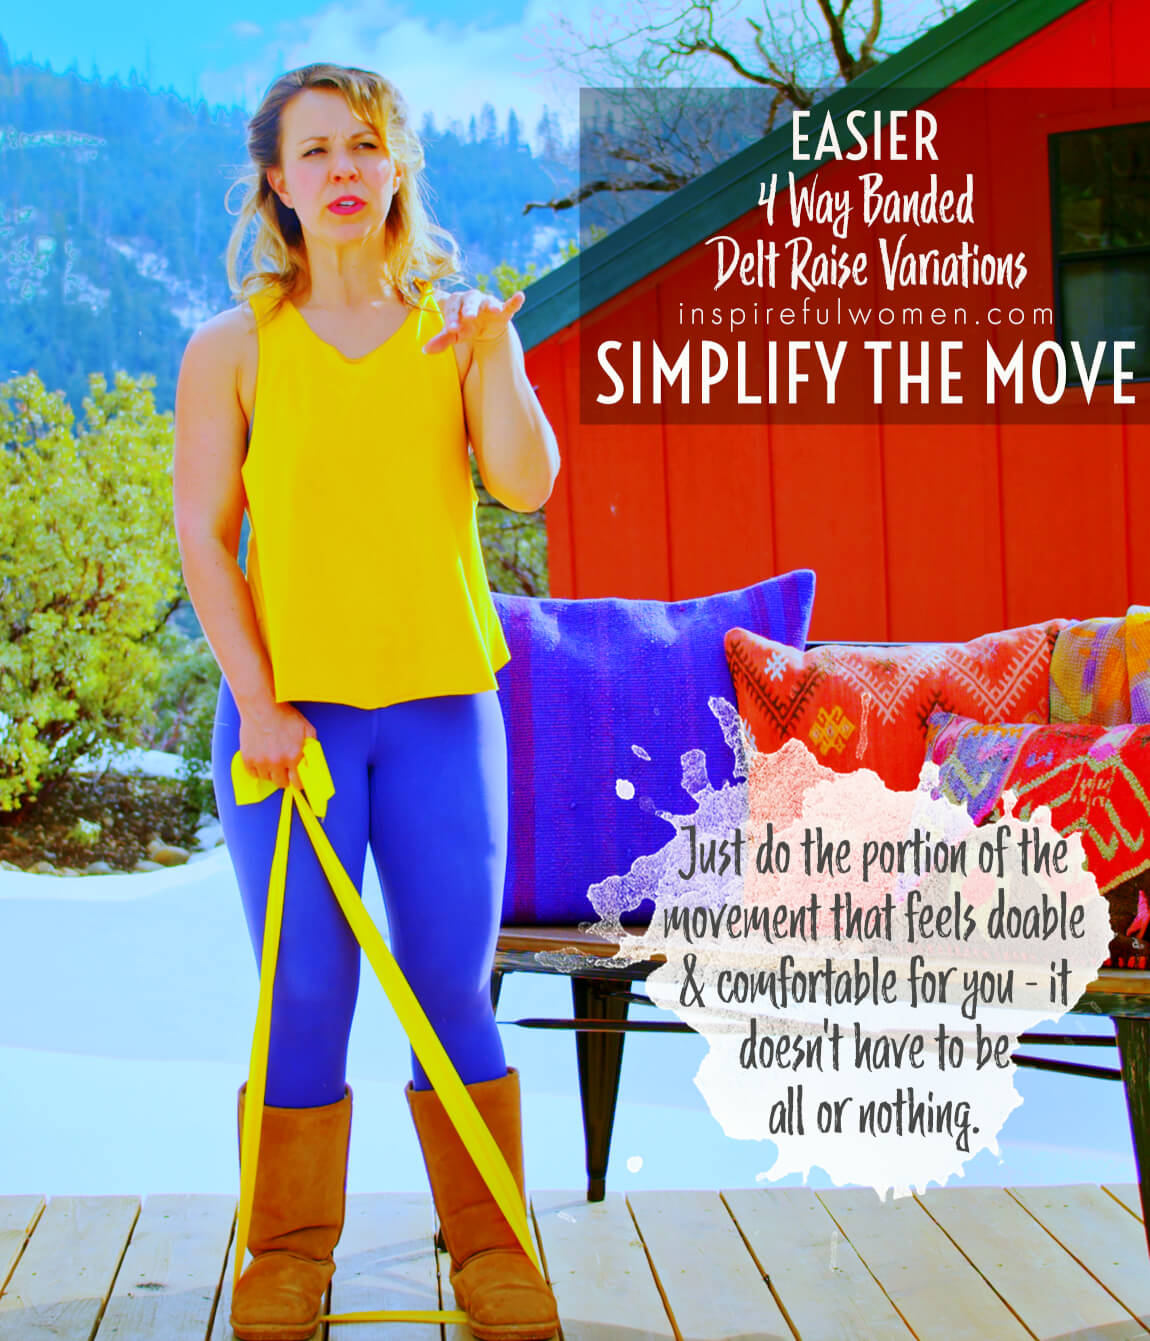 simplify-the-move-4-way-banded-deltoid-raise-shoulder-exercise-variation-easier